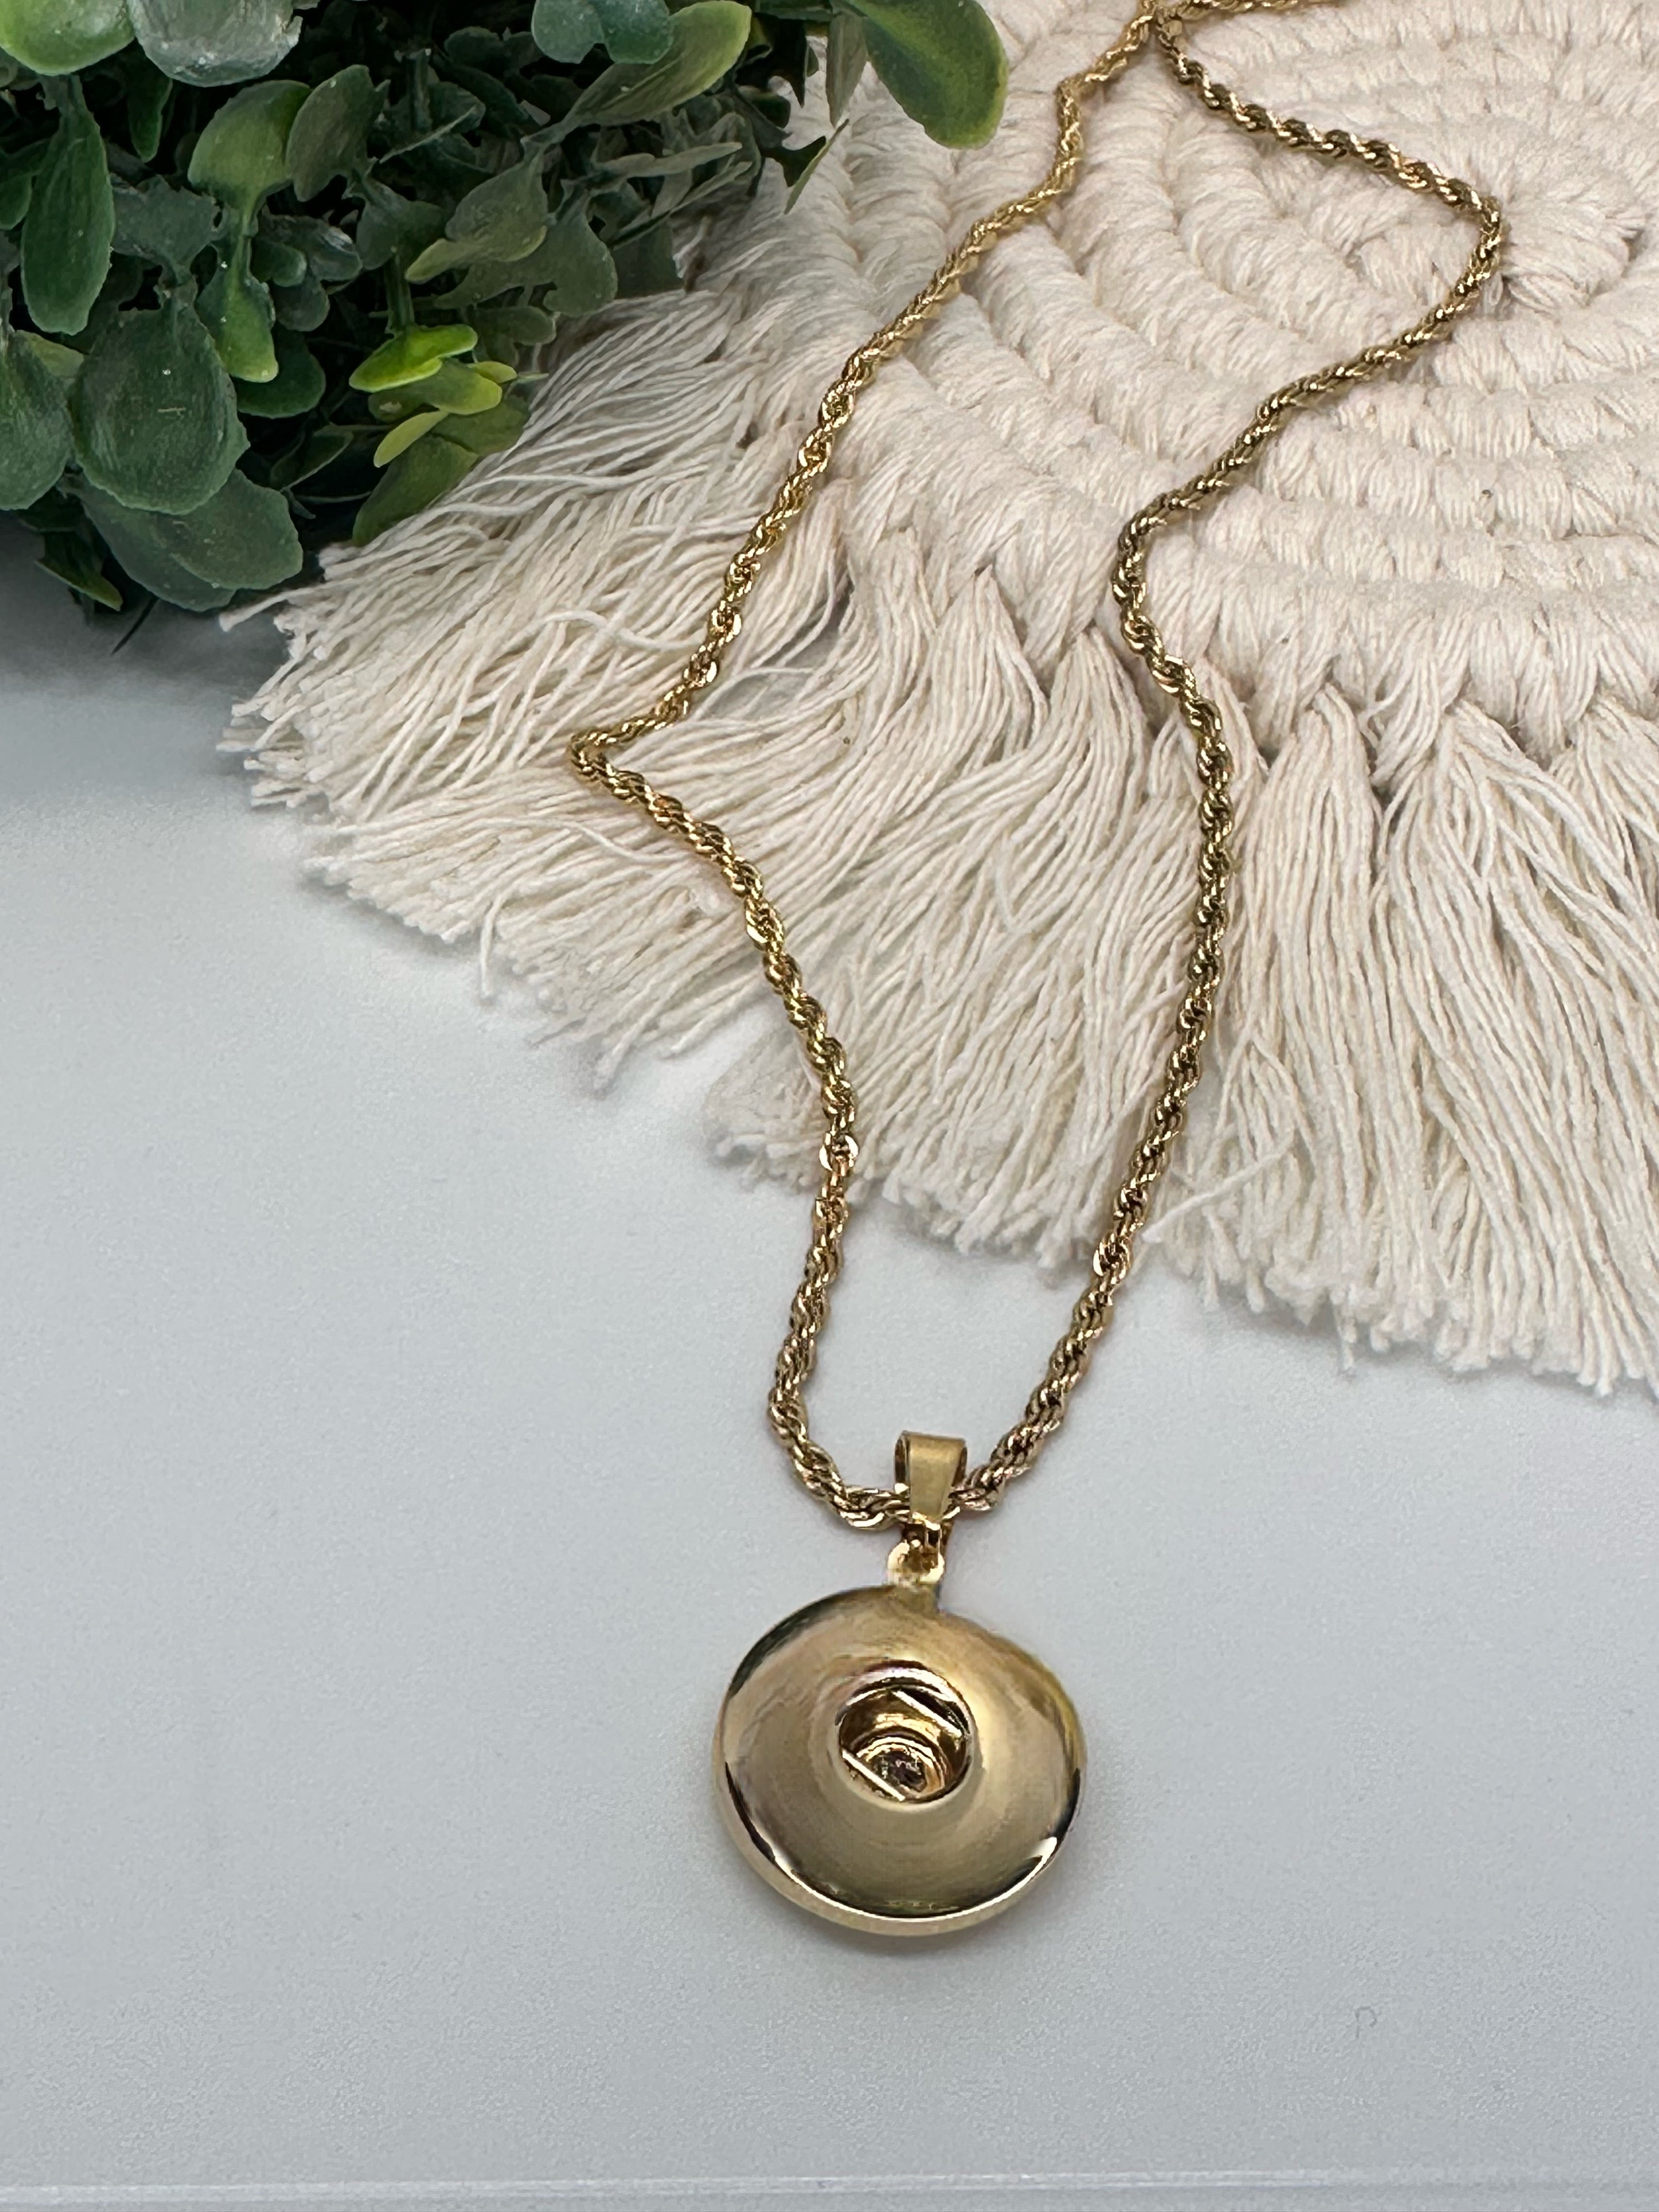 Only Me Pendant - Gold with balloon back